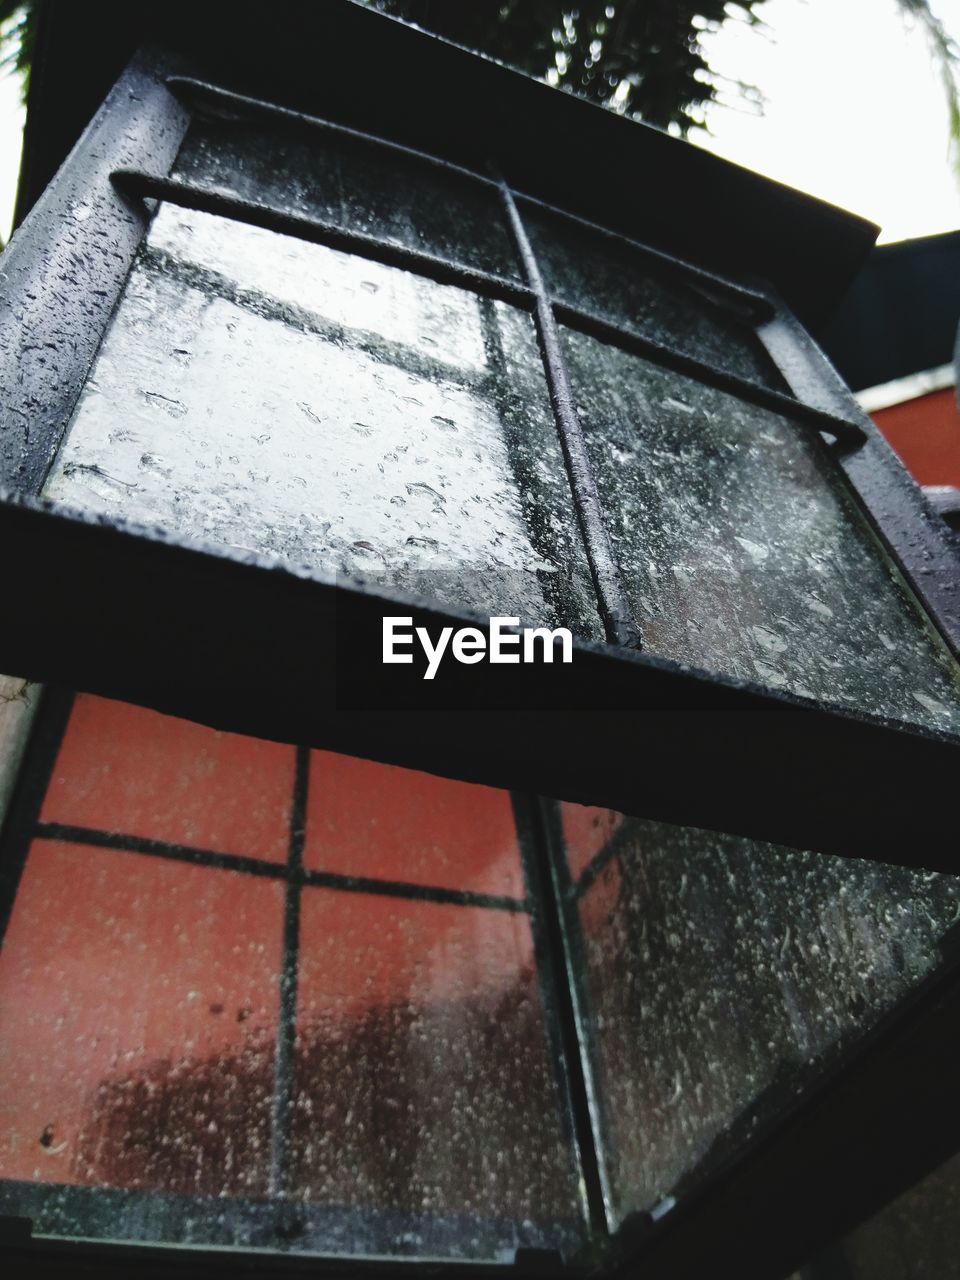 CLOSE-UP OF WET WINDOW DURING WINTER